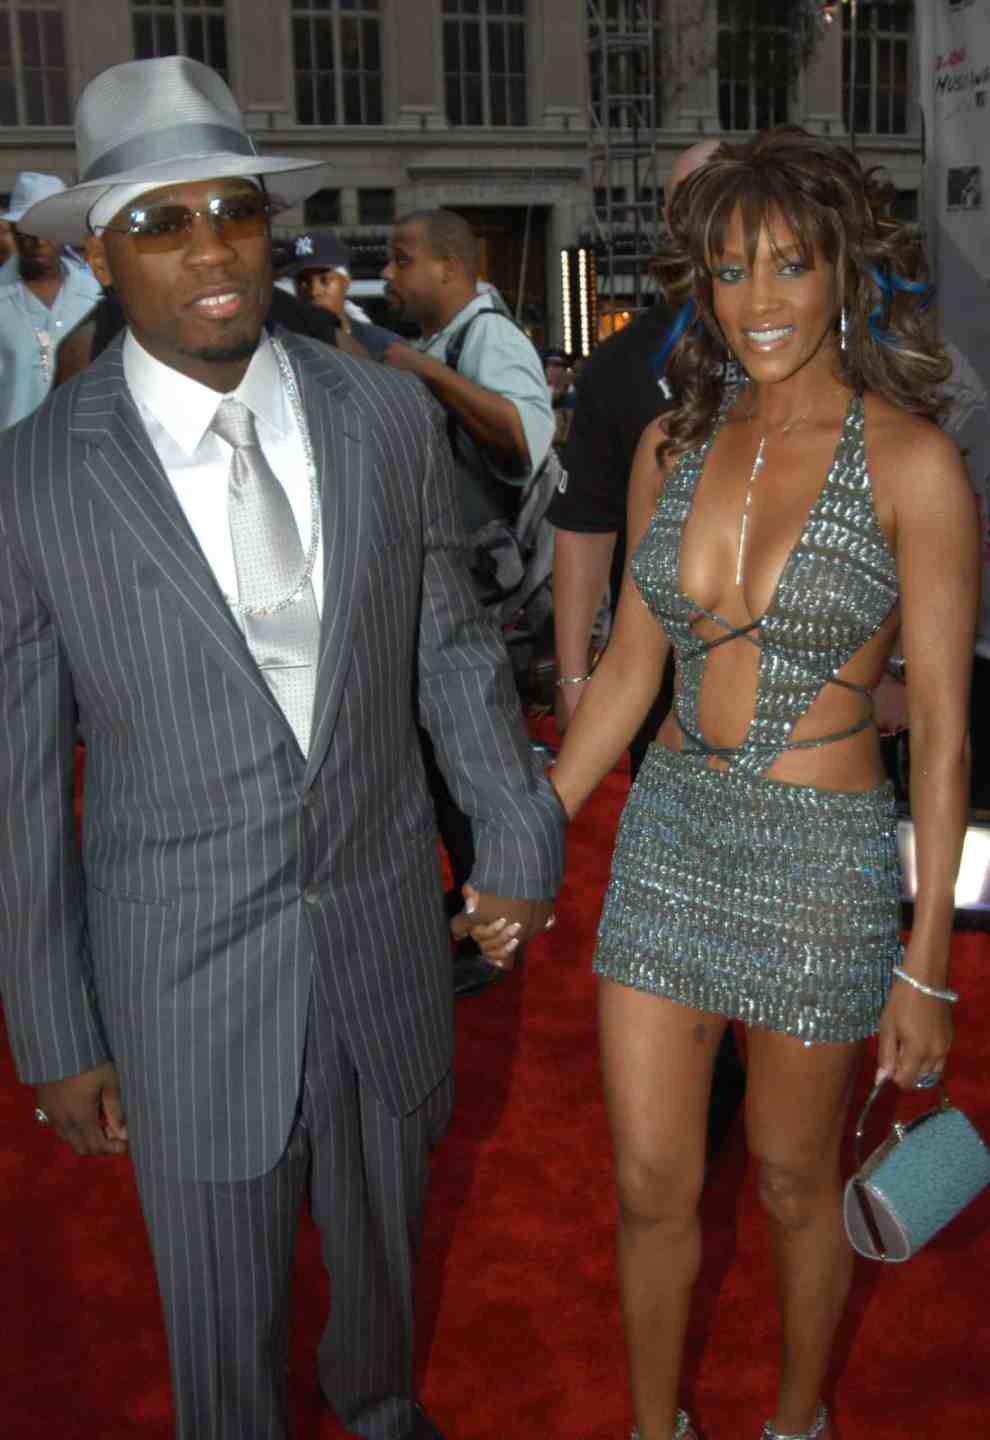 50 Cent and Vivica Fox arrive at 2003 MTV Video Music Awards